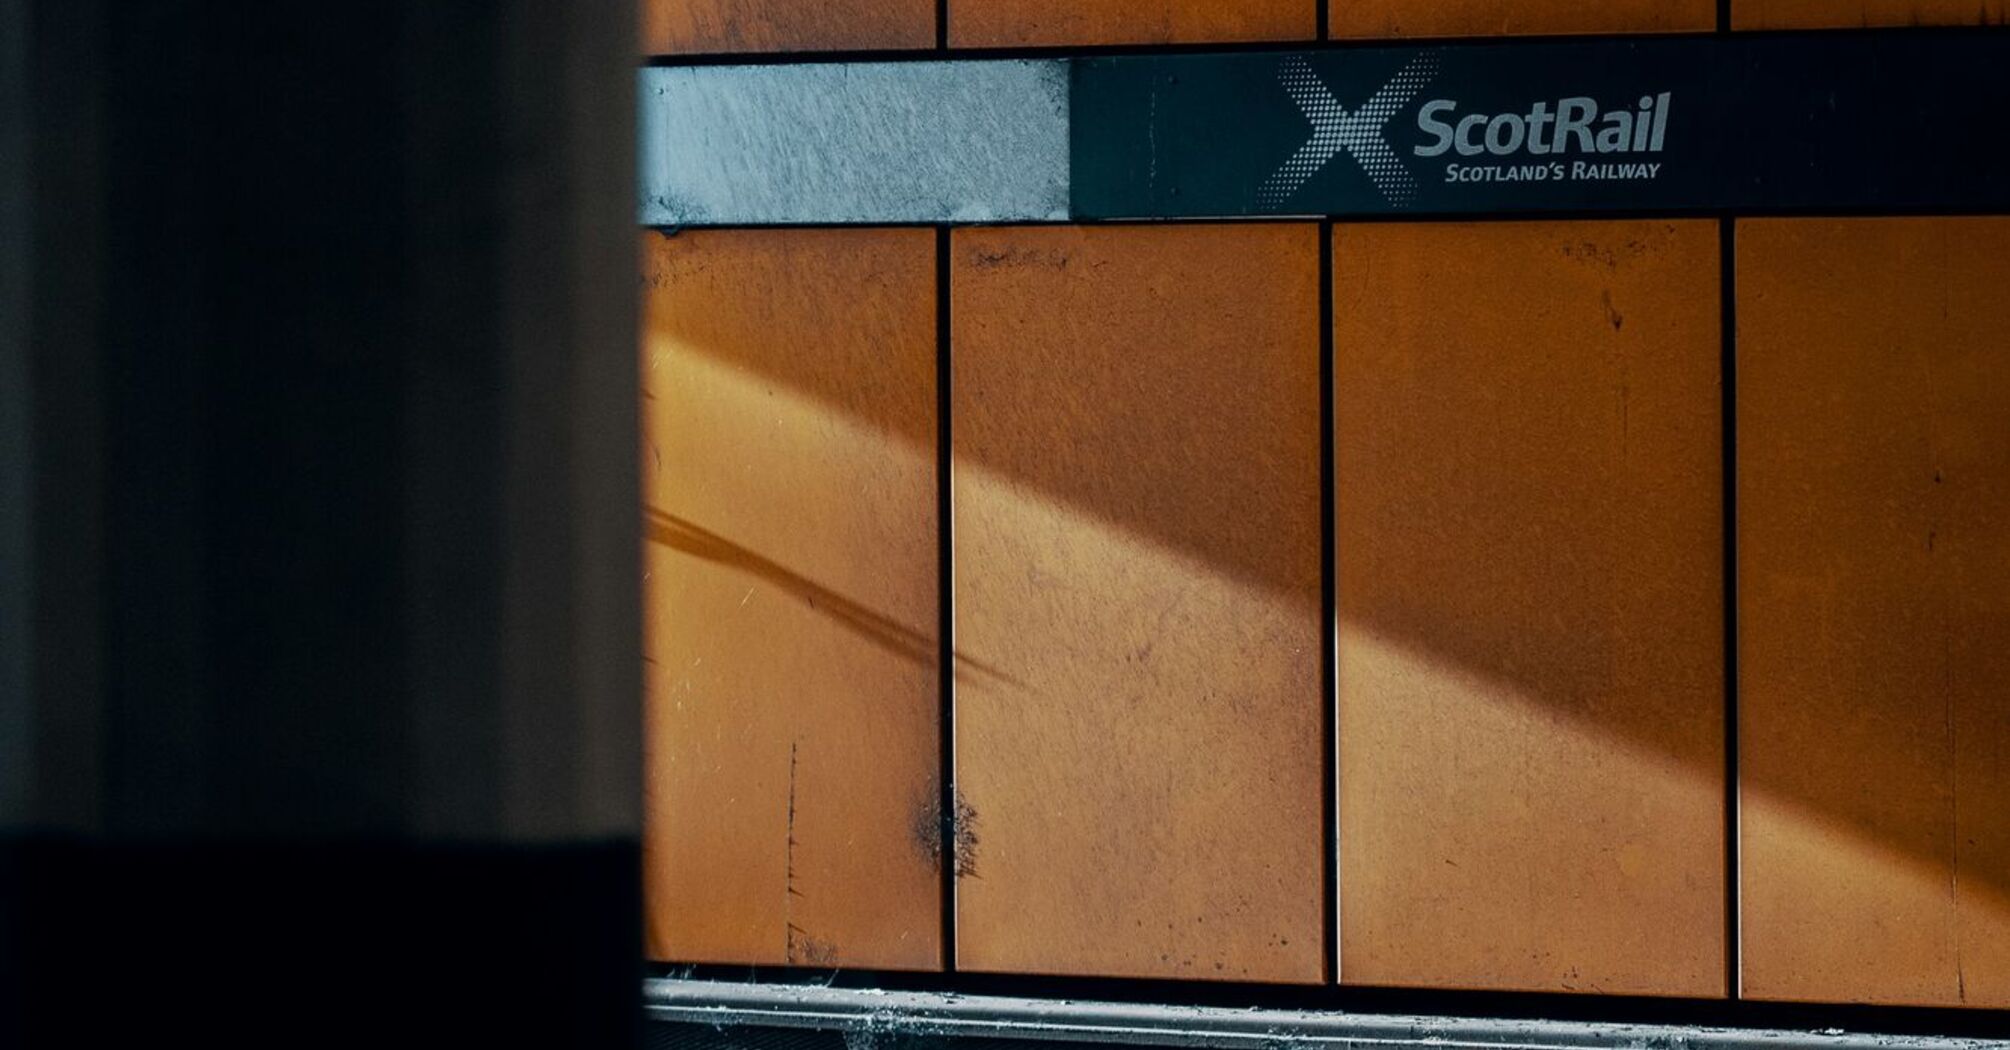 A ScotRail station platform with orange walls and the ScotRail logo